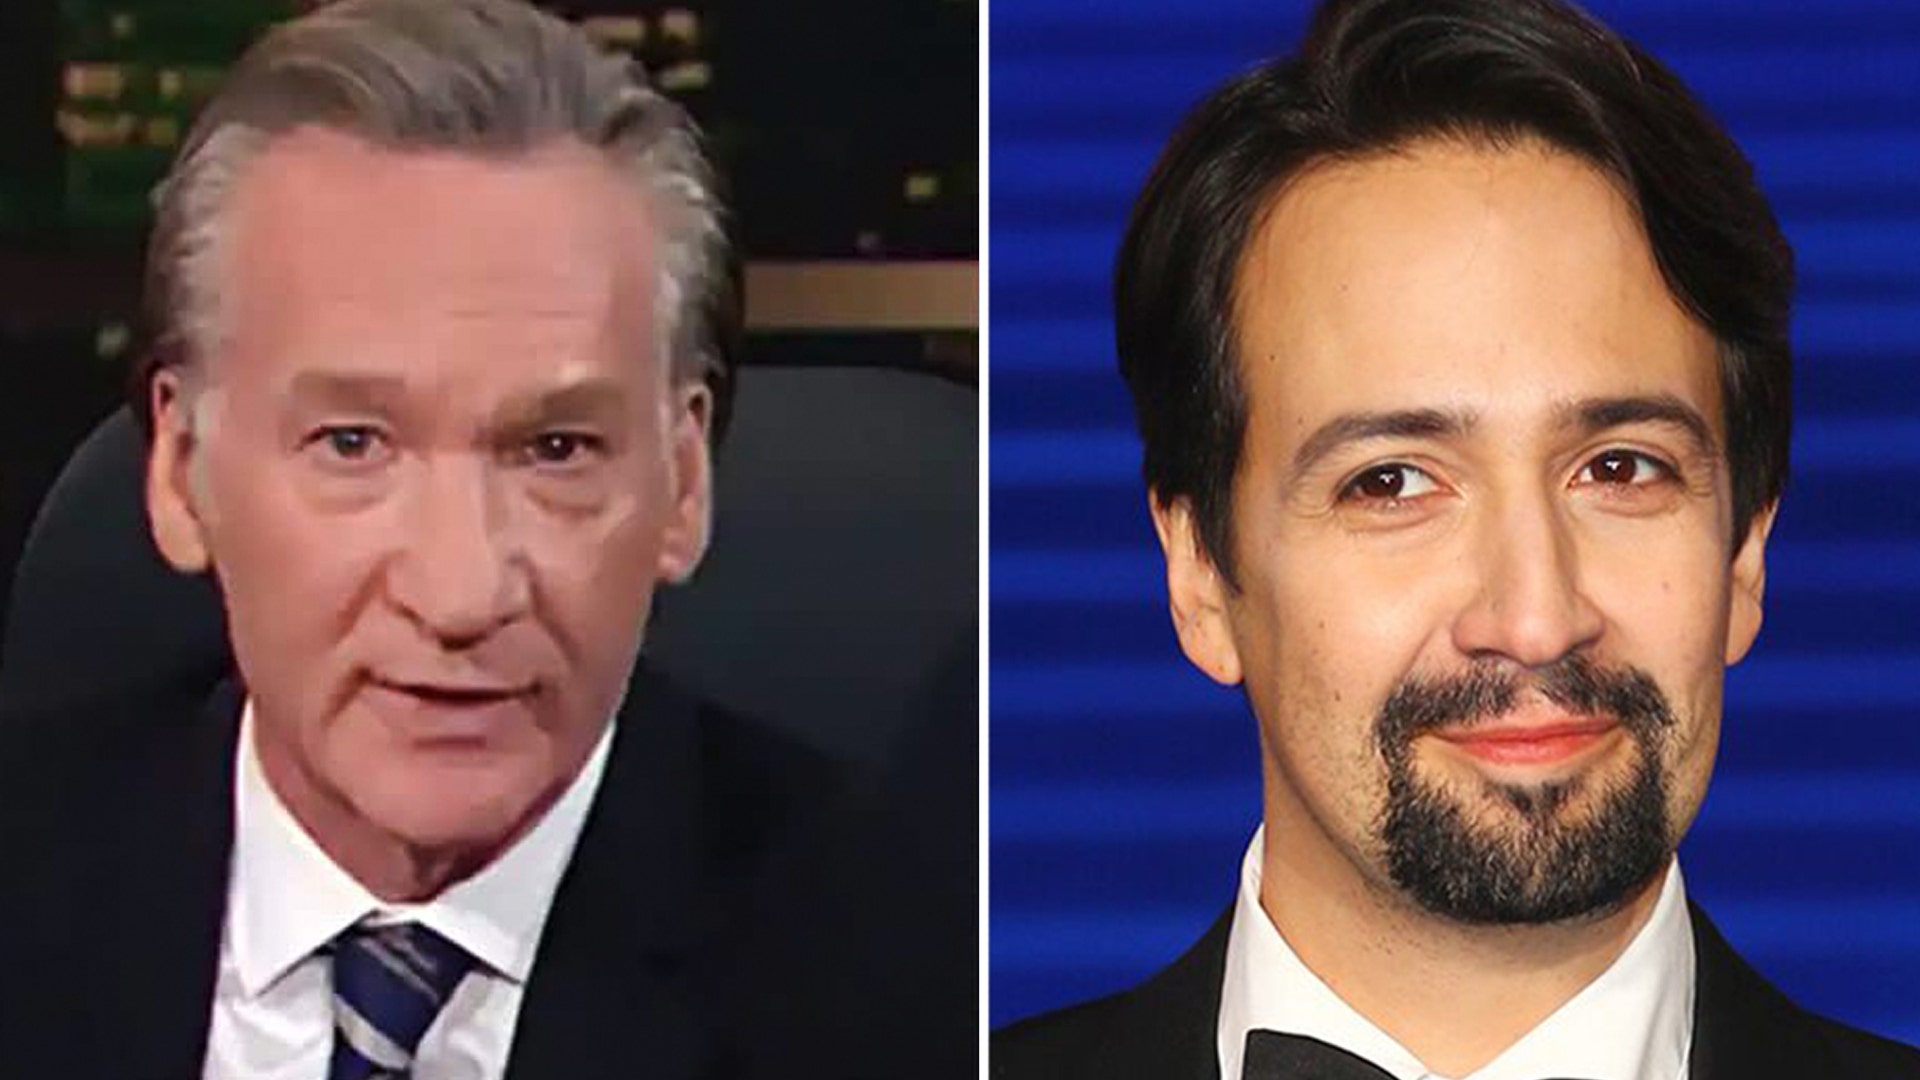 Bill Maher rips Lin-Manuel Miranda for 'In the Heights' diversity apology: 'This is why people hate Democrats'